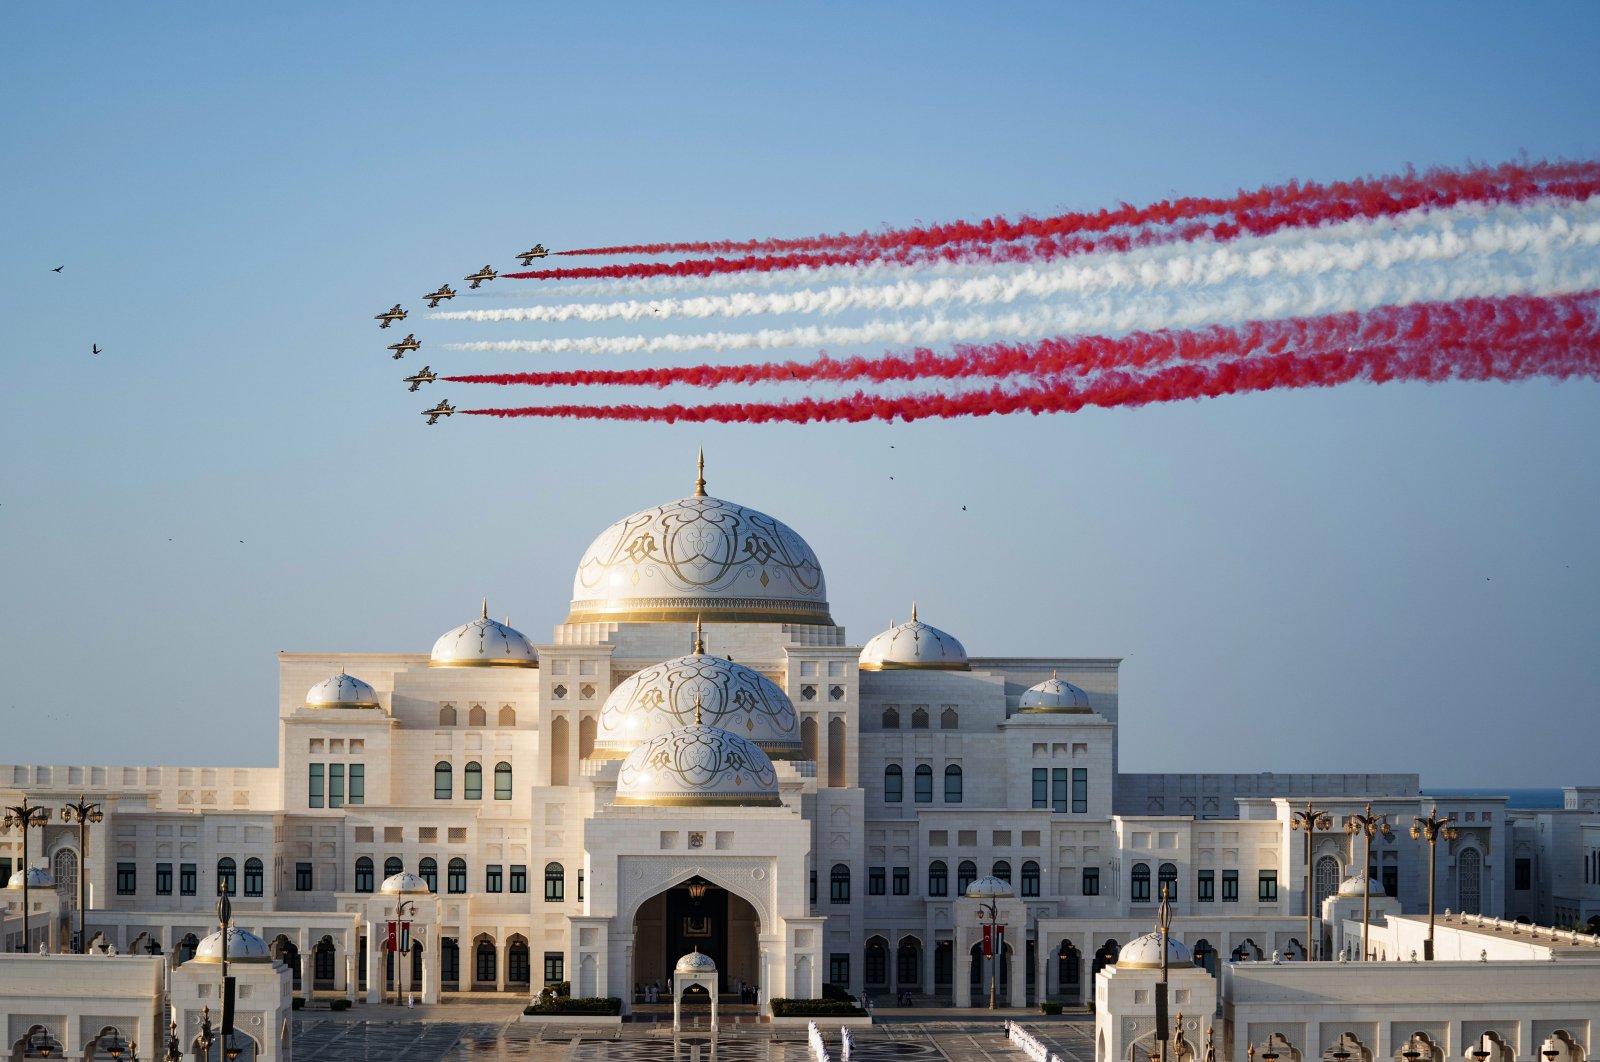 The United Arab Emirates (UAE) Air Force aerobatic display team makes a stunt flying in colors of the Turkish flag, red and white, for President Recep Tayyip Erdoğan&#039;s visit to the country, in the capital Abu Dhabi, UAE, Feb. 14, 2022. (AA Photo)